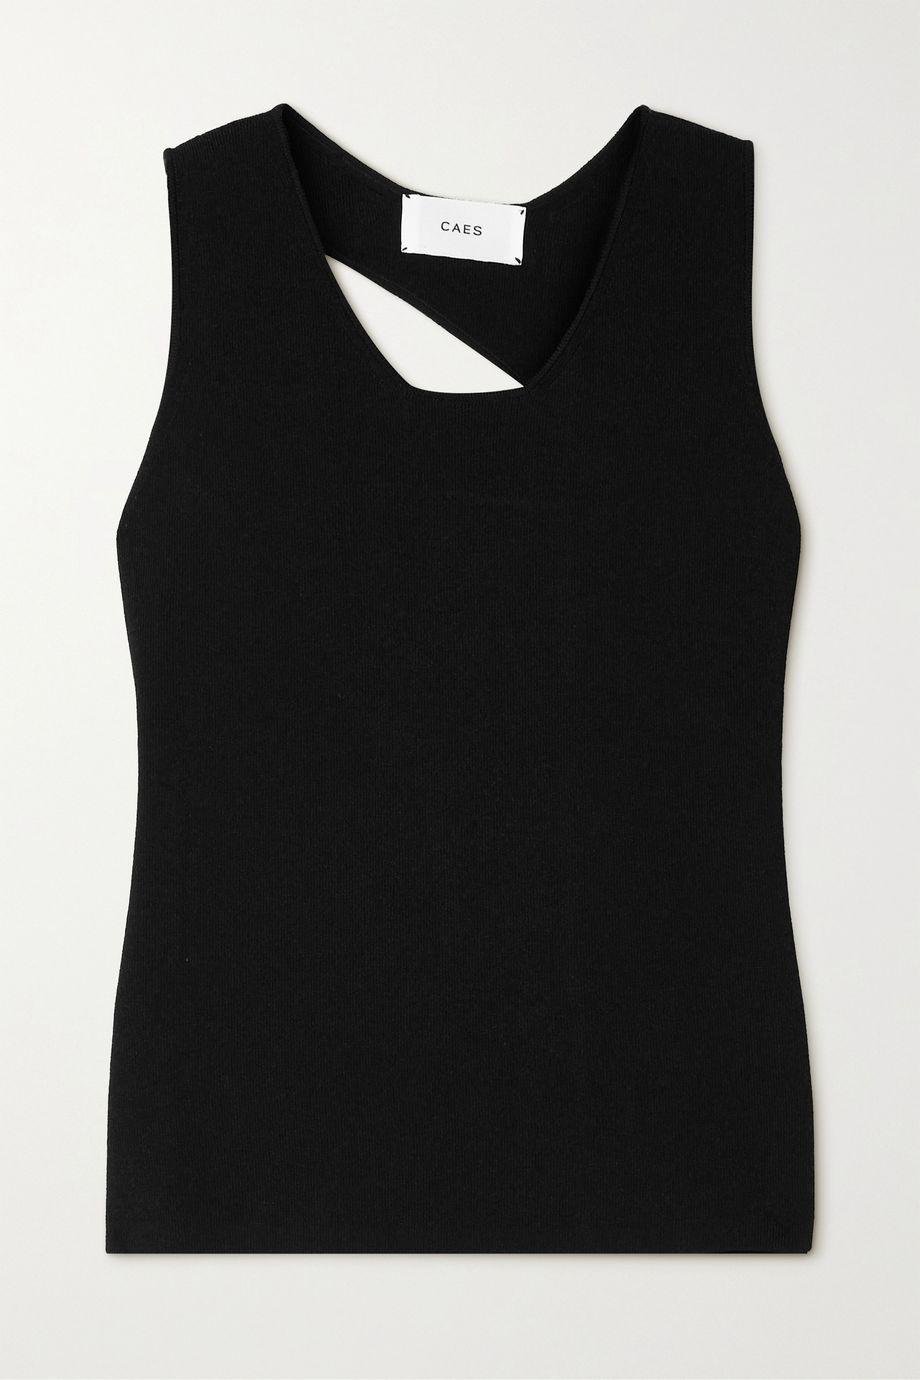 Cutout jersey tank by CAES